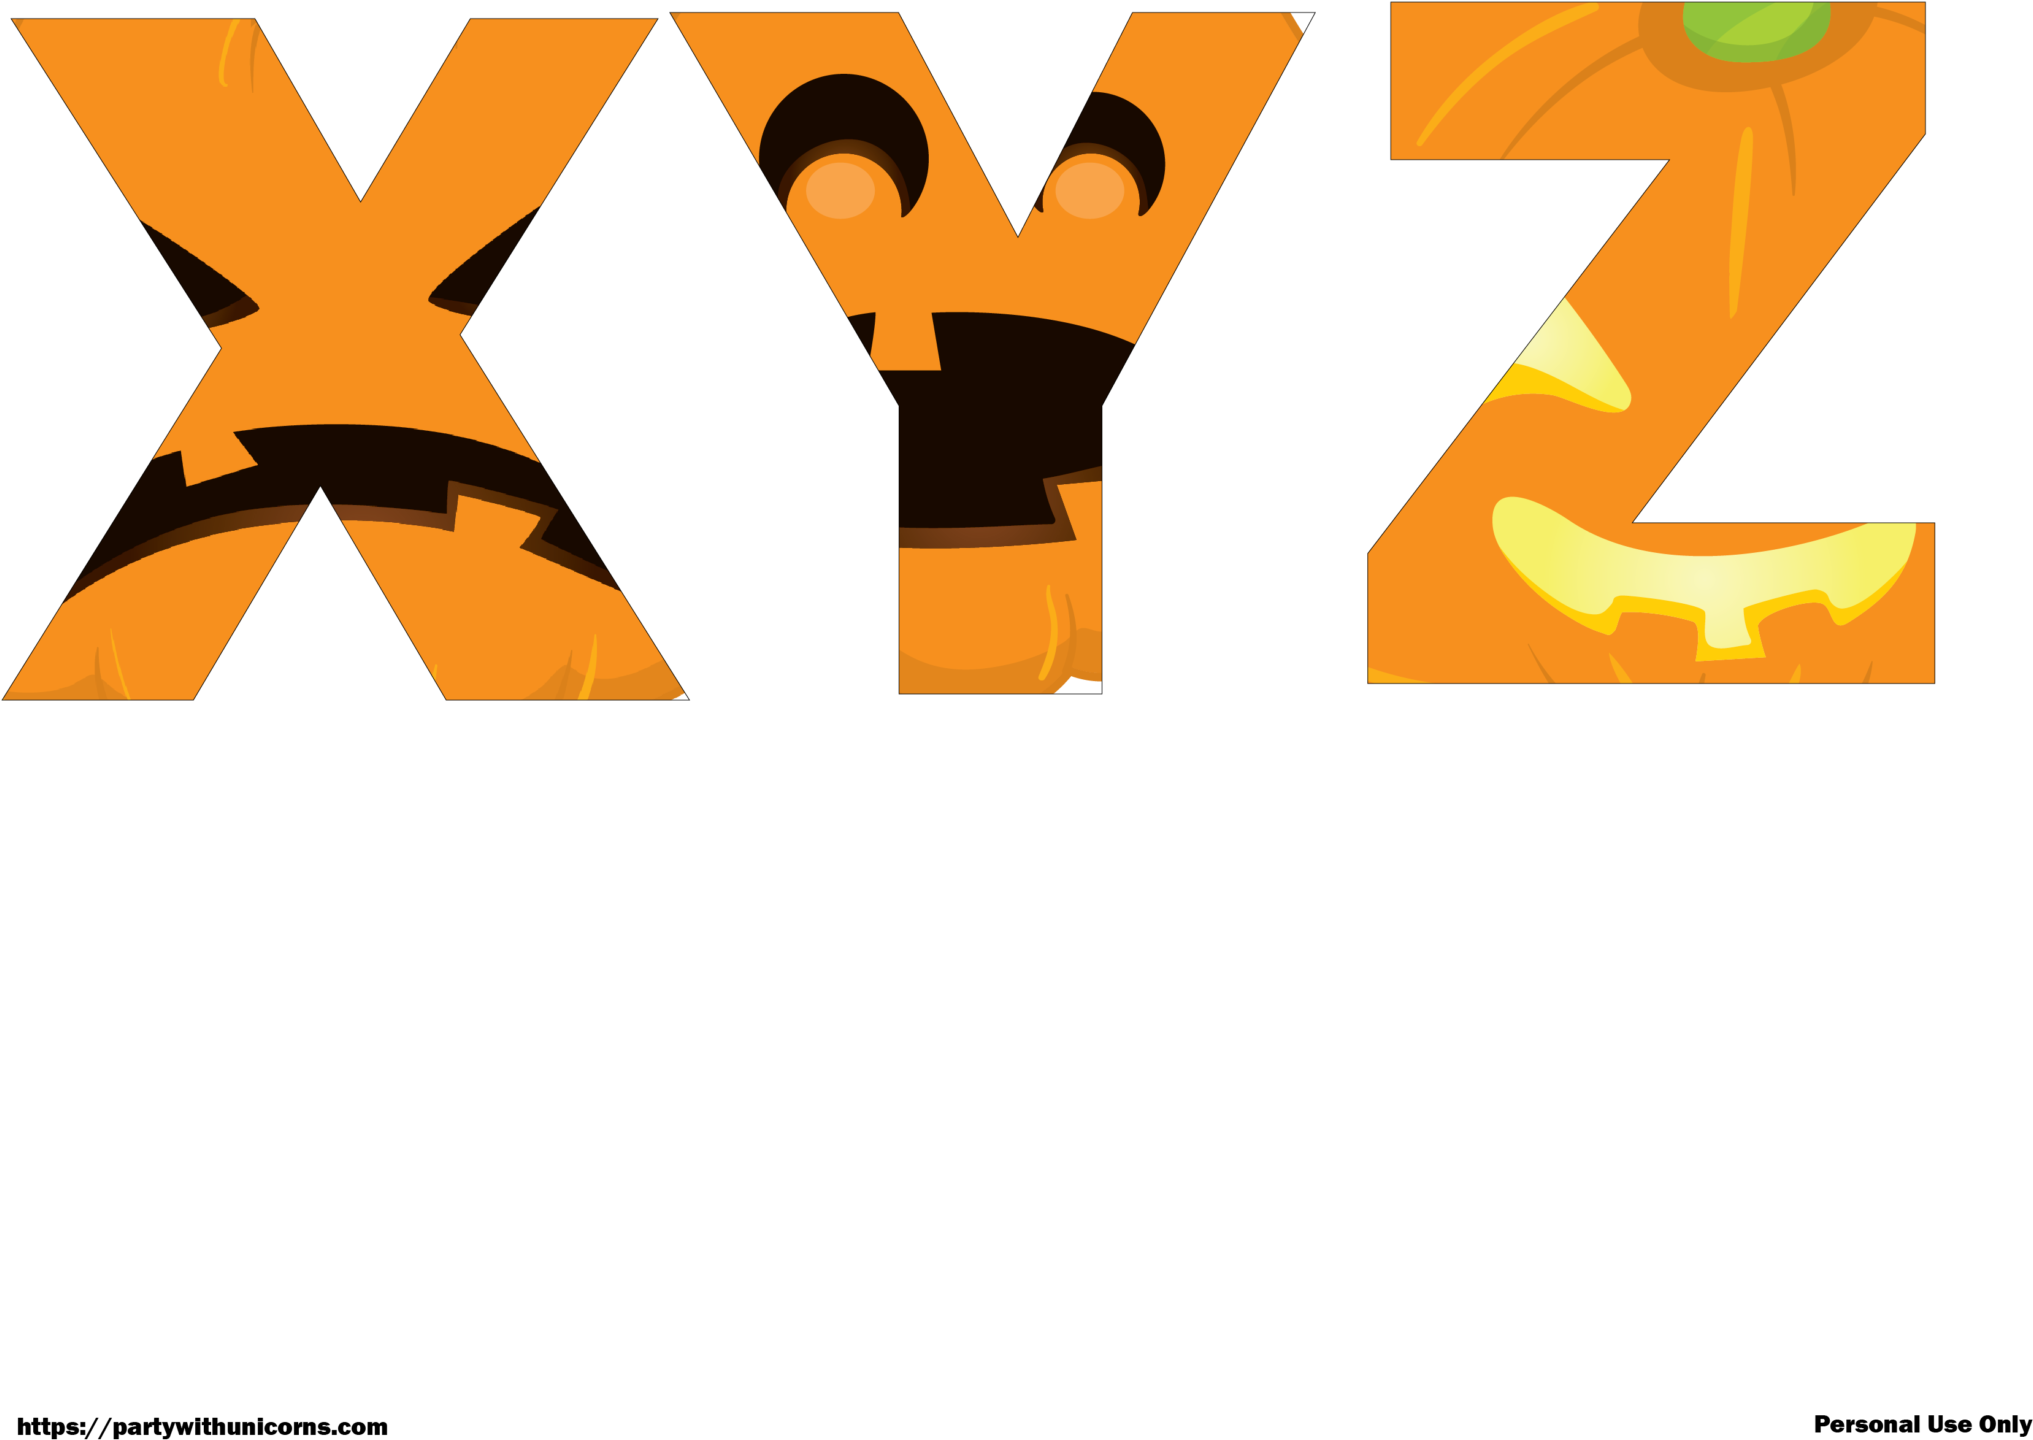 The Jack O Lantern Faces Letters Are All Saved As Png - The Jack O Lantern Faces Letters Are All Saved As Png (2048x1550)